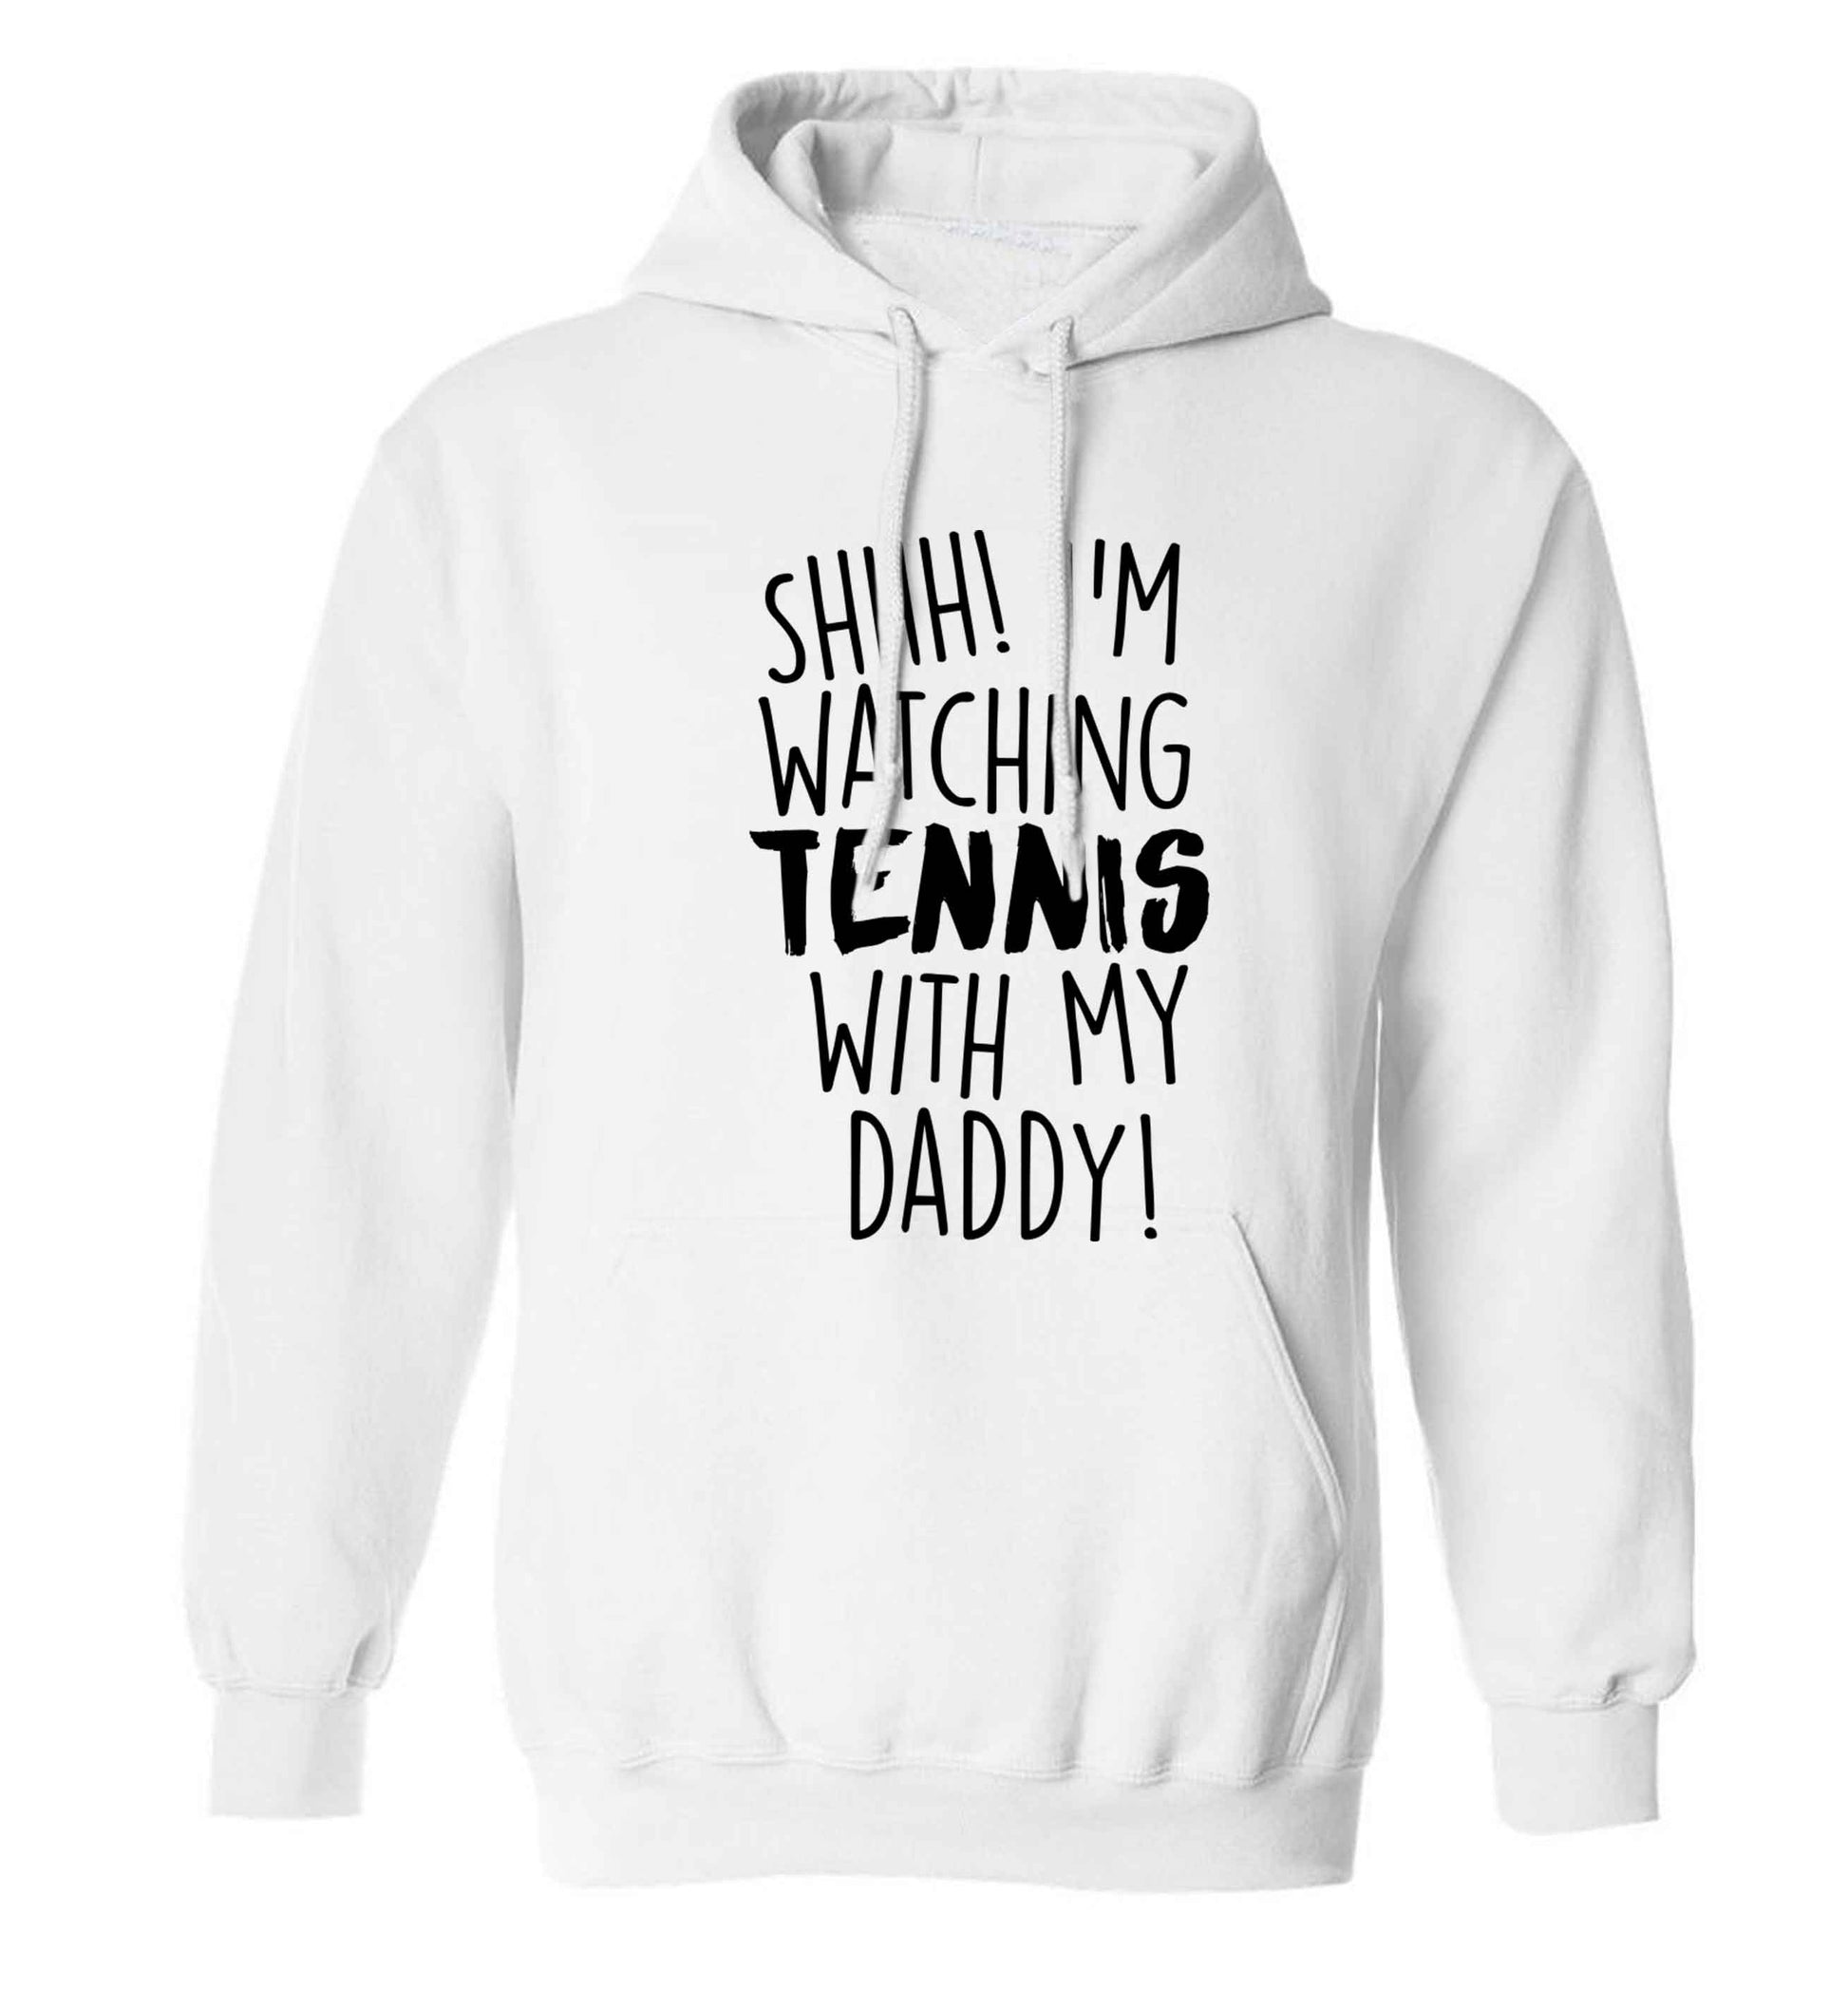 Shh! I'm watching tennis with my daddy! adults unisex white hoodie 2XL